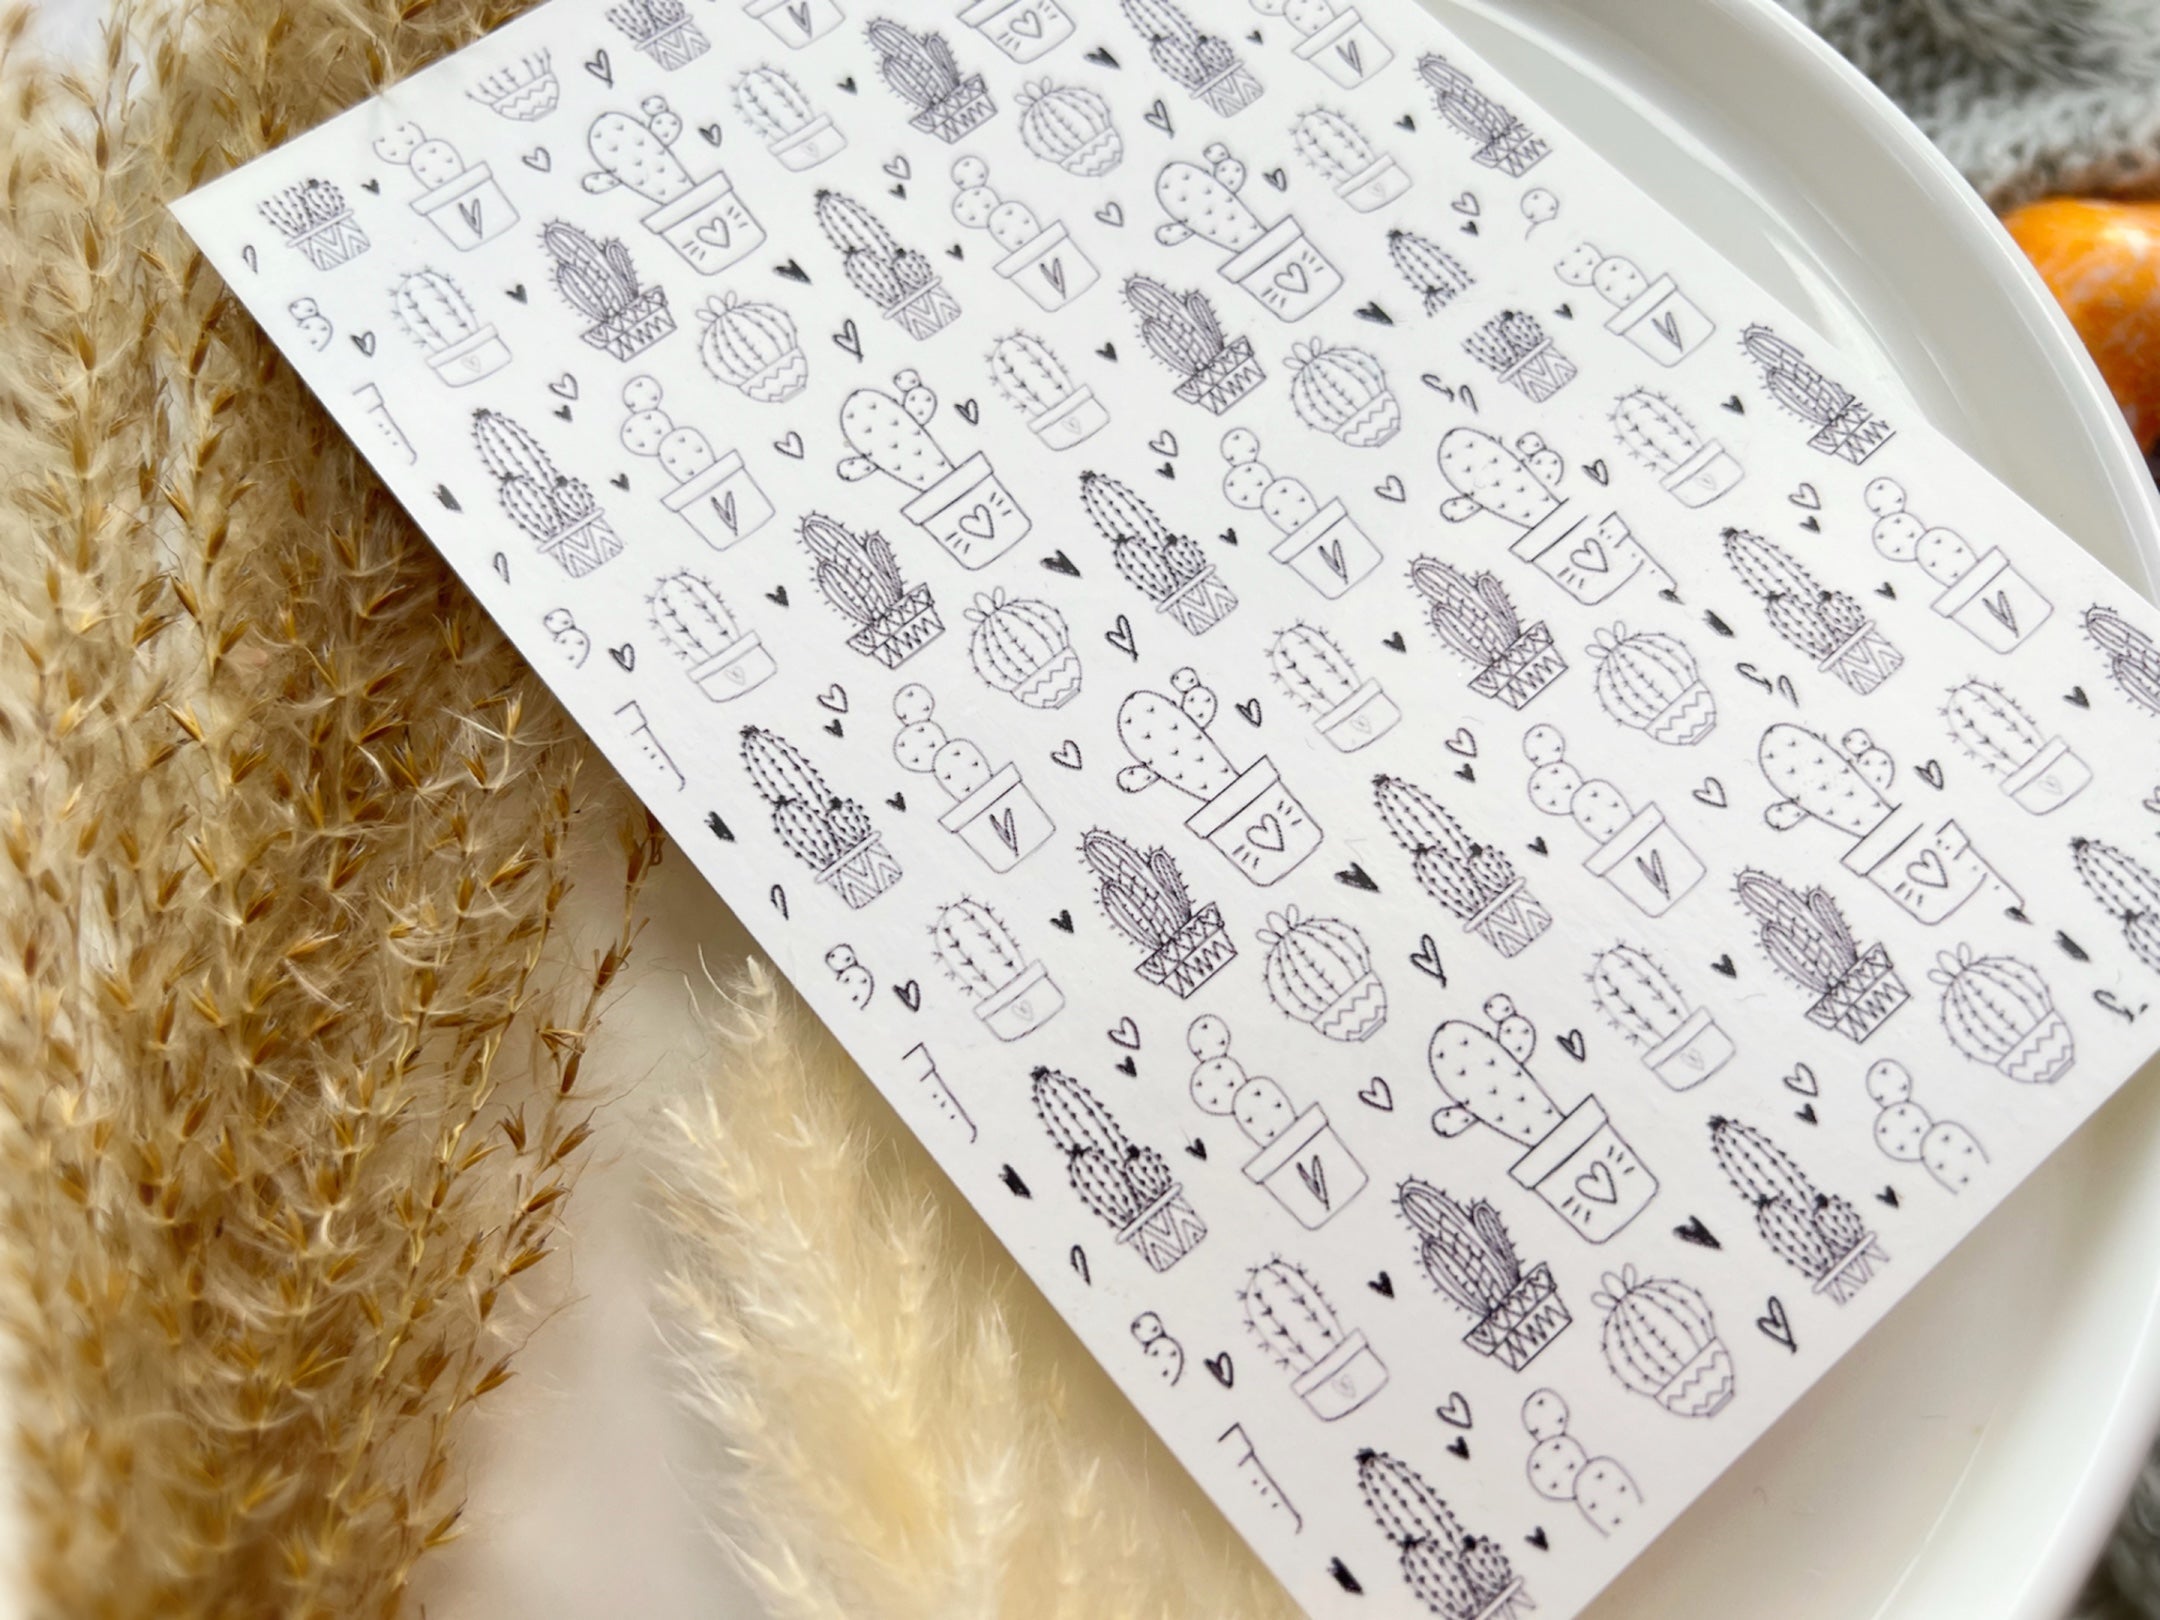 1 Sheet, Approx 13x90cm, Cactus Print Water Decal Image Transfer for Polymer Clay / Ceramics